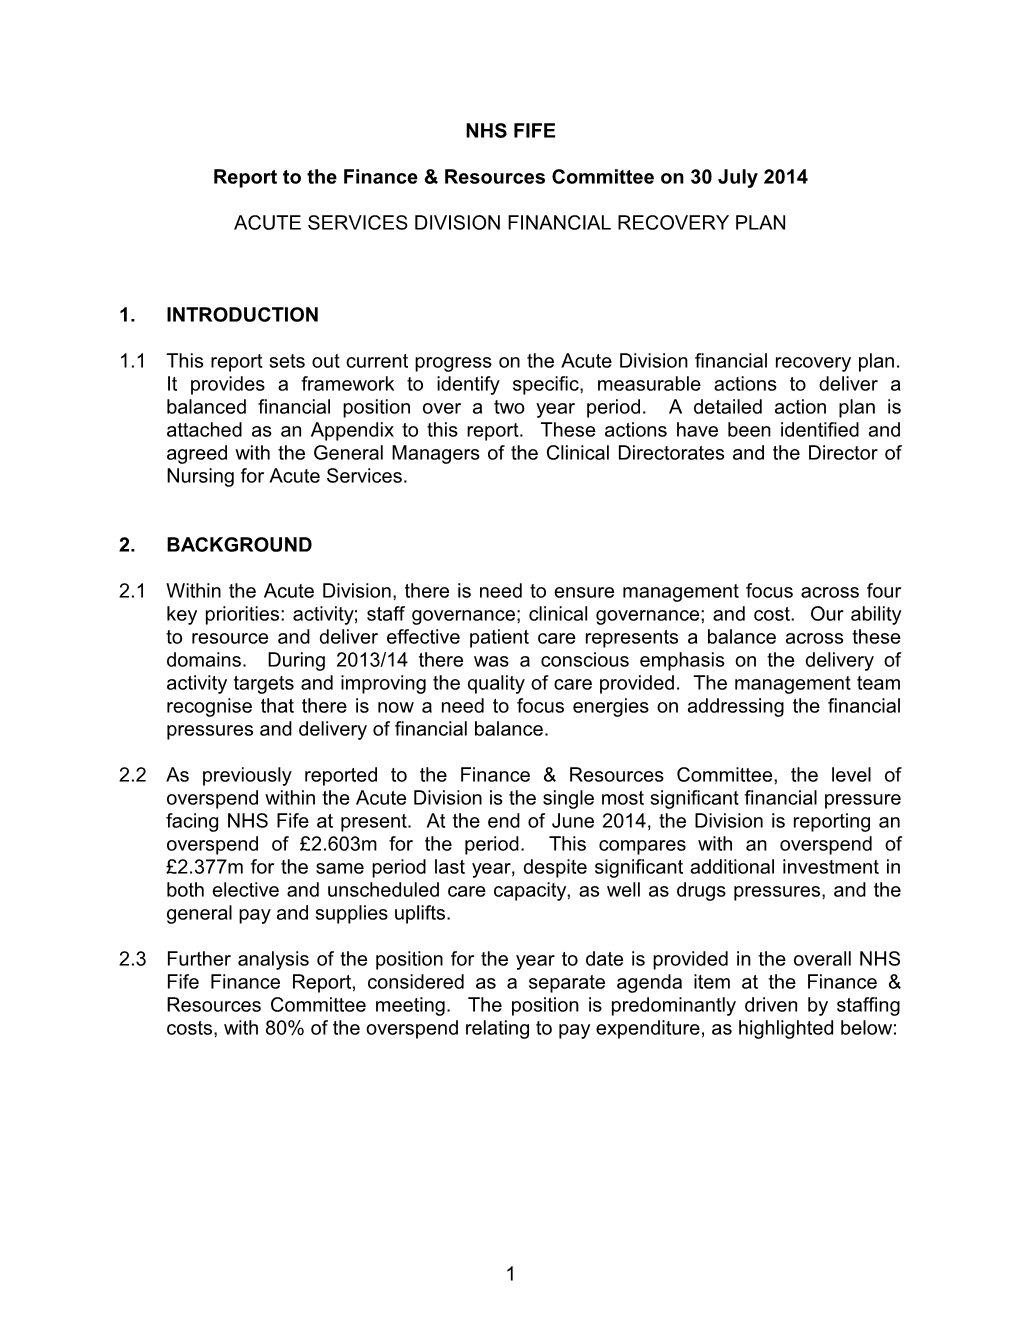 Report to the Finance & Resources Committee on 30 July 2014